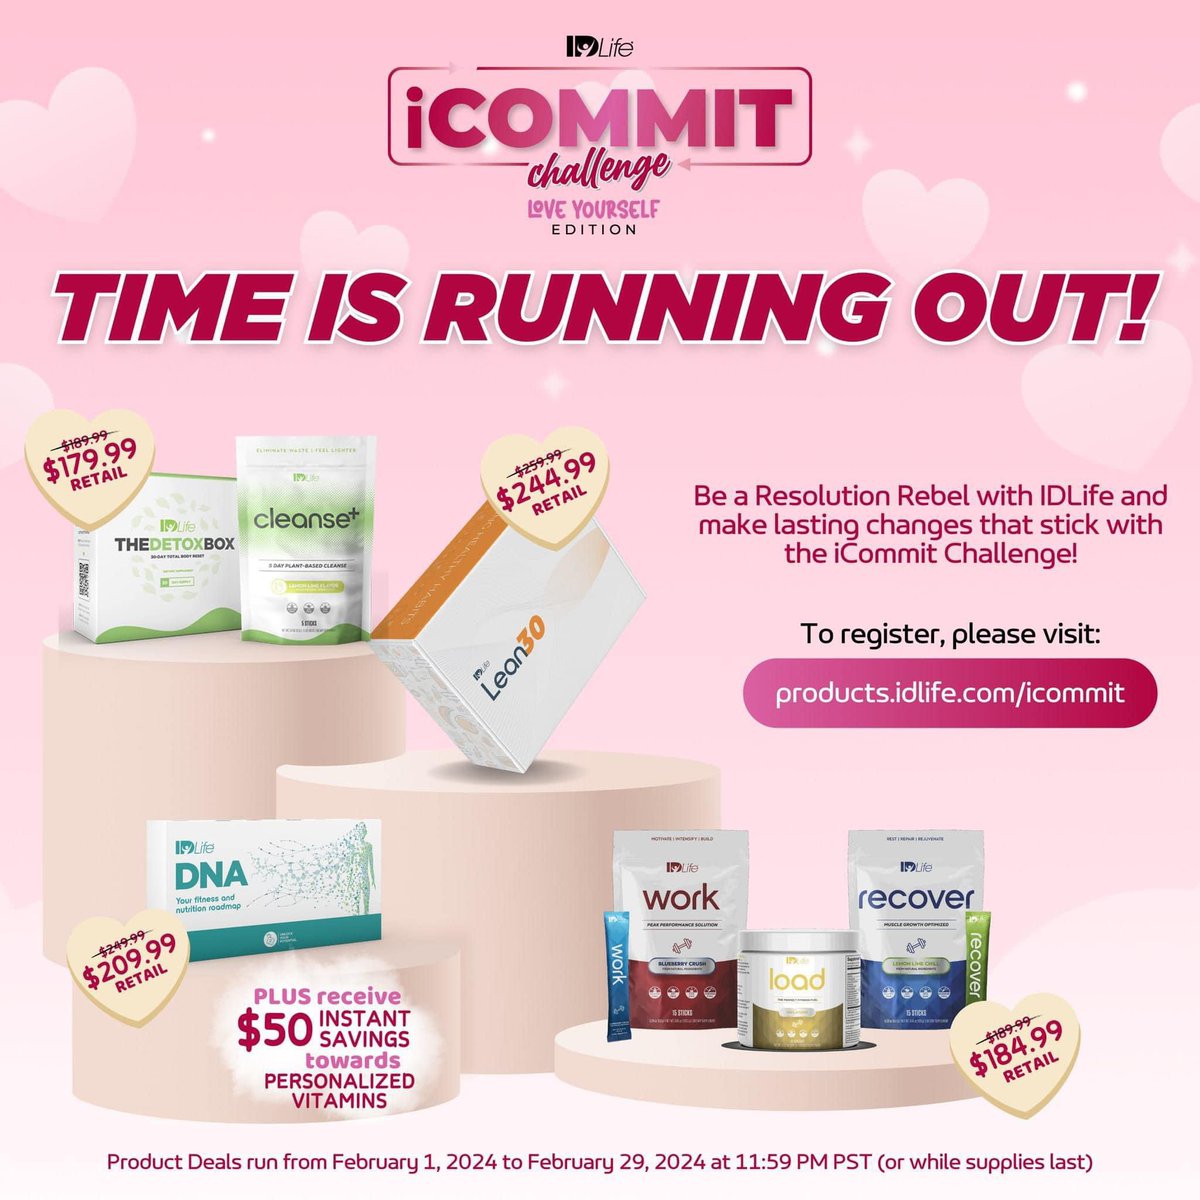 Time is running out to snag one of these incredible deals and embark on a journey to a healthy and happier you with the iCommit Challenge: Love Yourself Edition! Don't Wait! These smokin' deals end February 29th at 11:59PM PST!
ChristyVan.IDLife.com